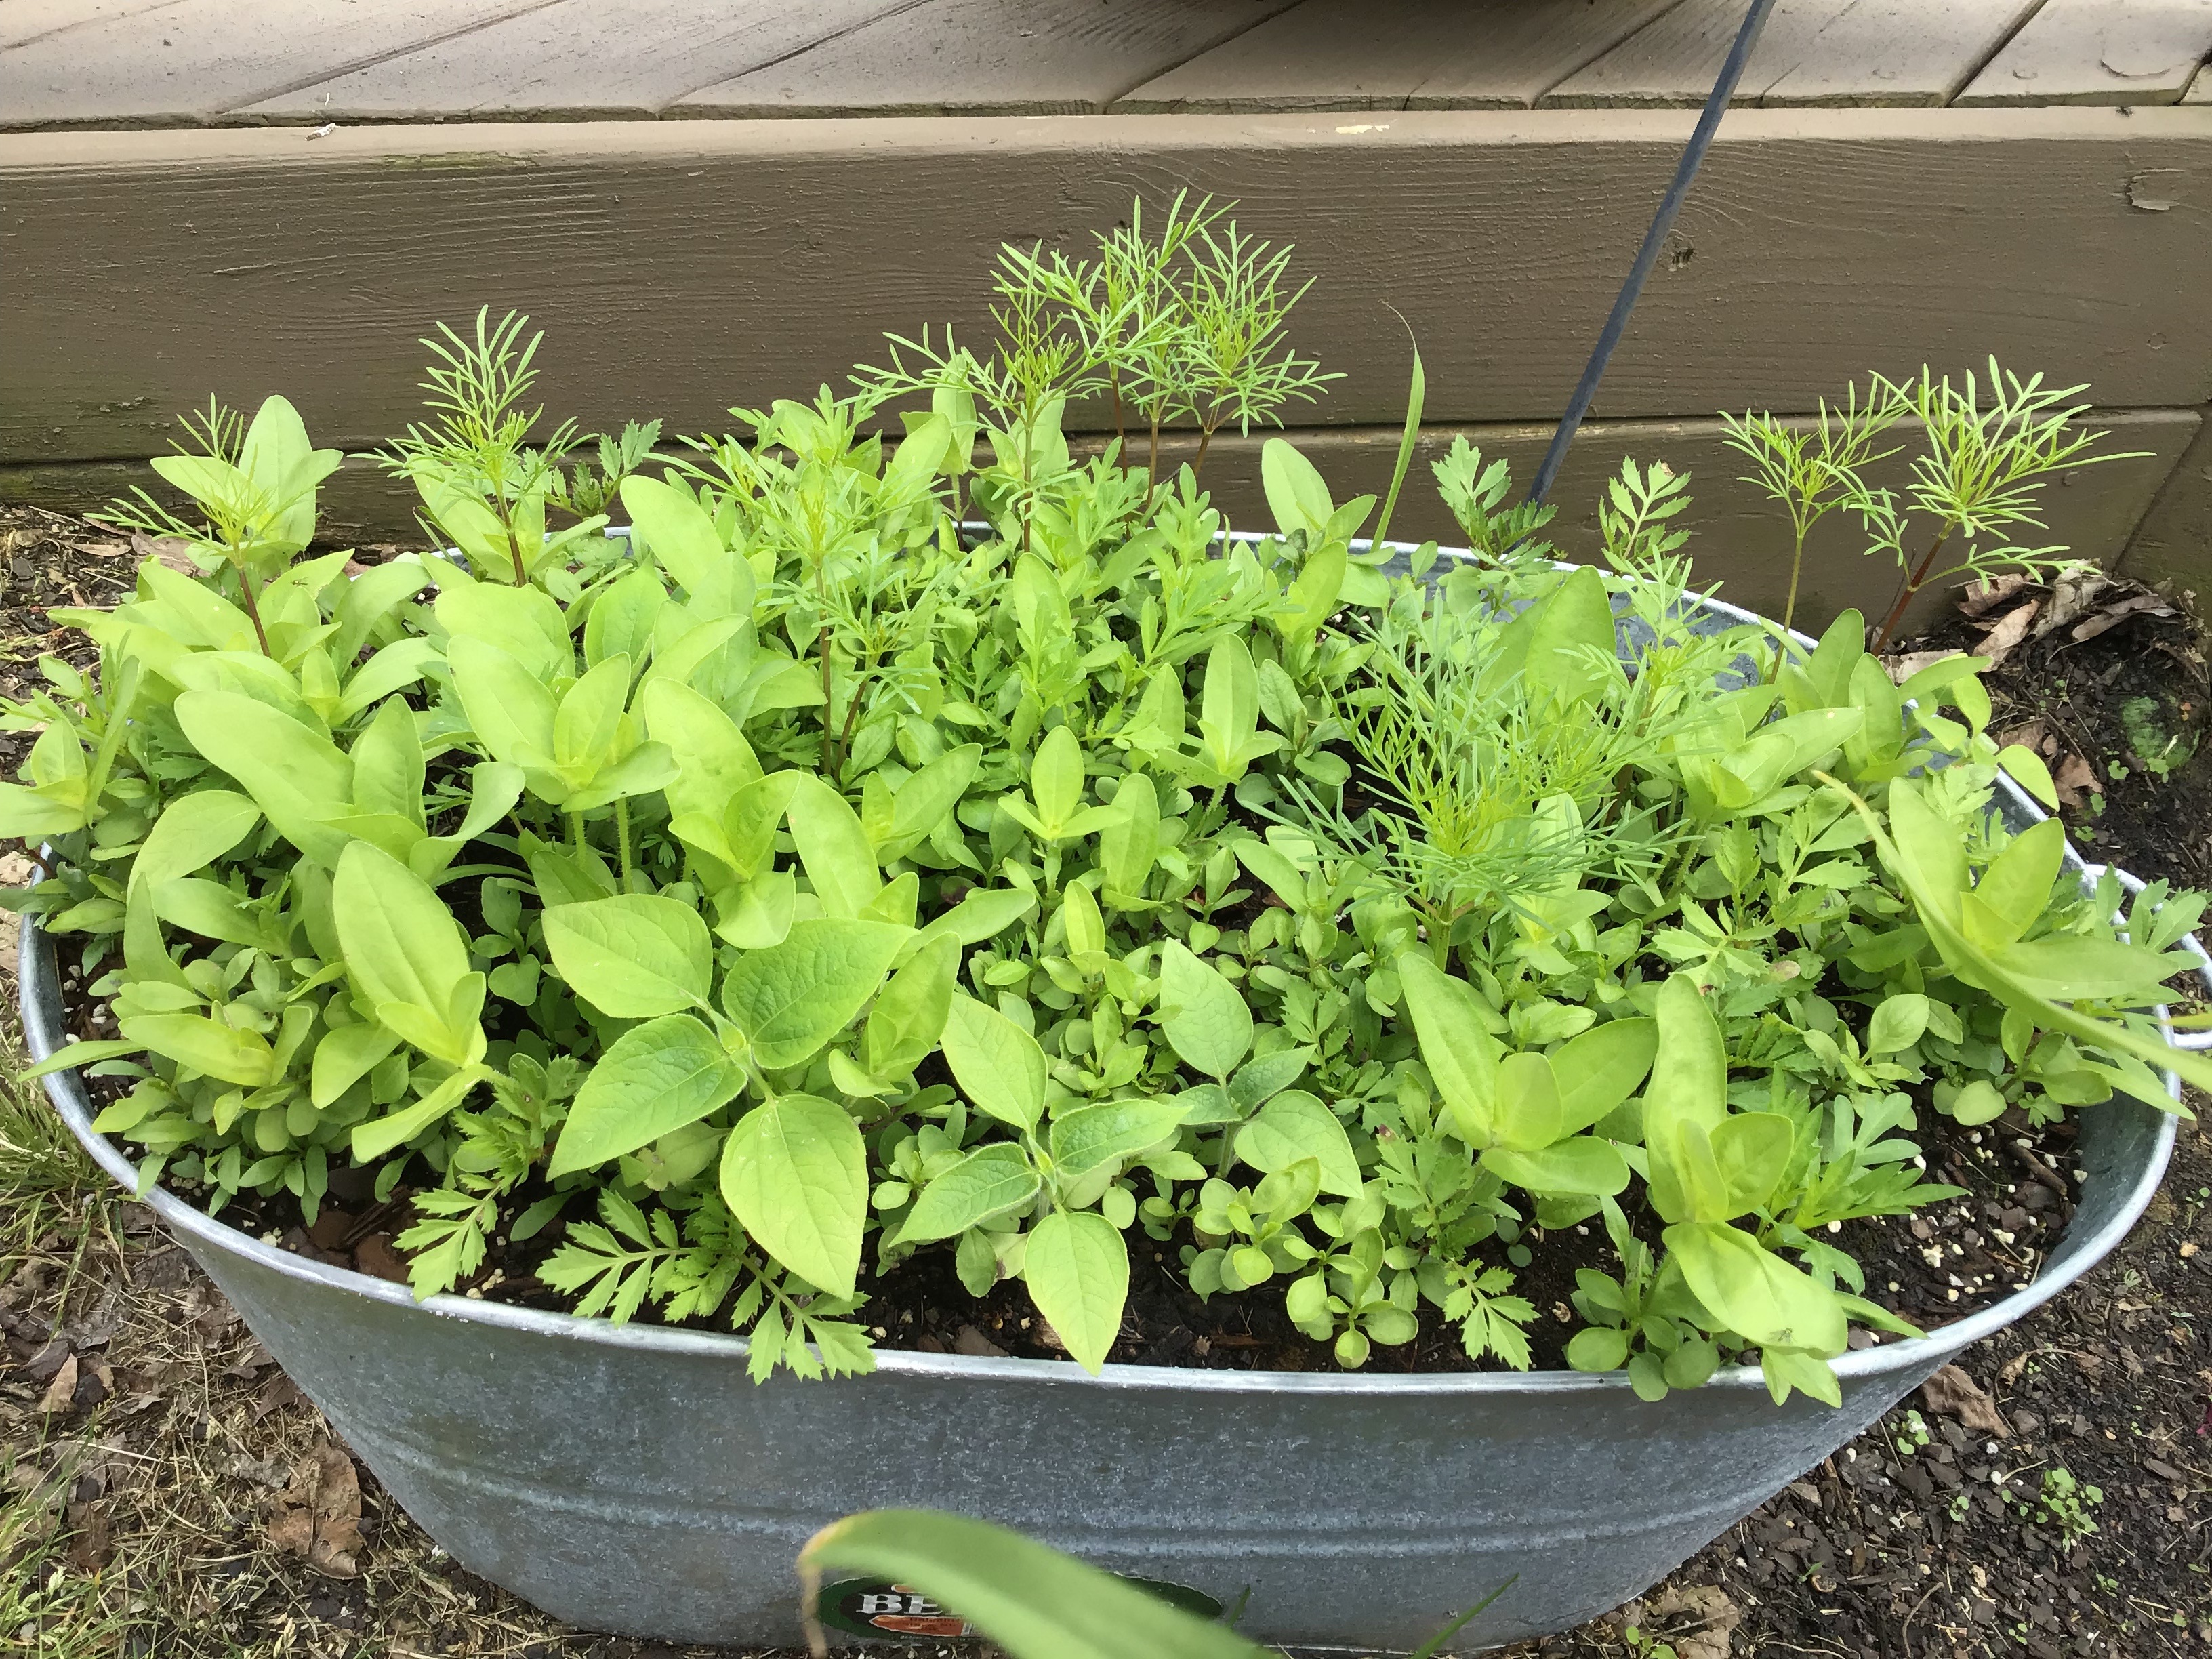 (1/2) “Wildflowers! I planted the seeds on Easter afternoon and here is an update on 5/14/19. I root soaked and foliar sprayed with Blue Gold™ Hydro and Super Carb!” -Amy Carraway